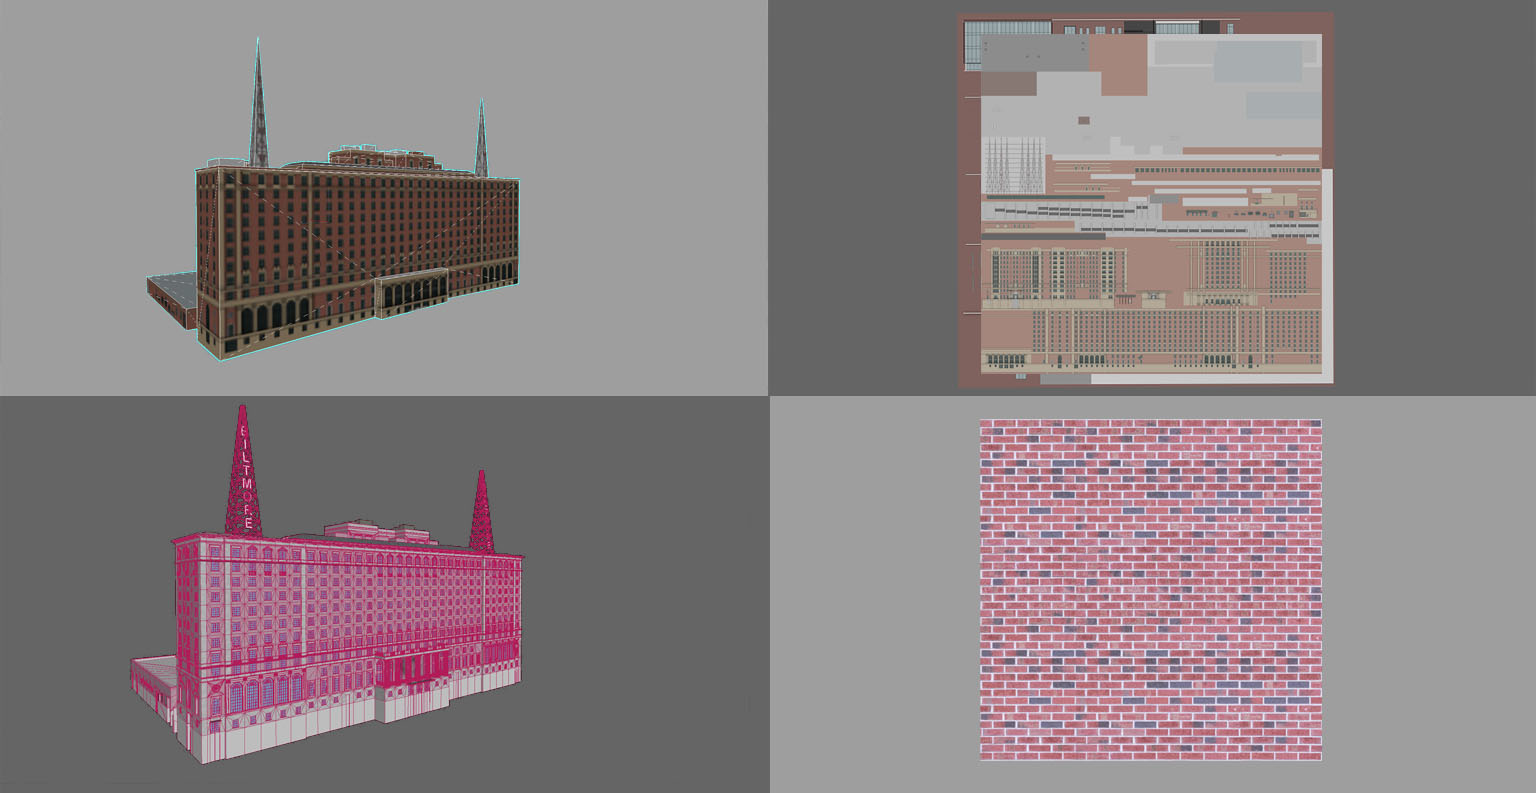 Different views of the same 3D model of the biltmore hotel 